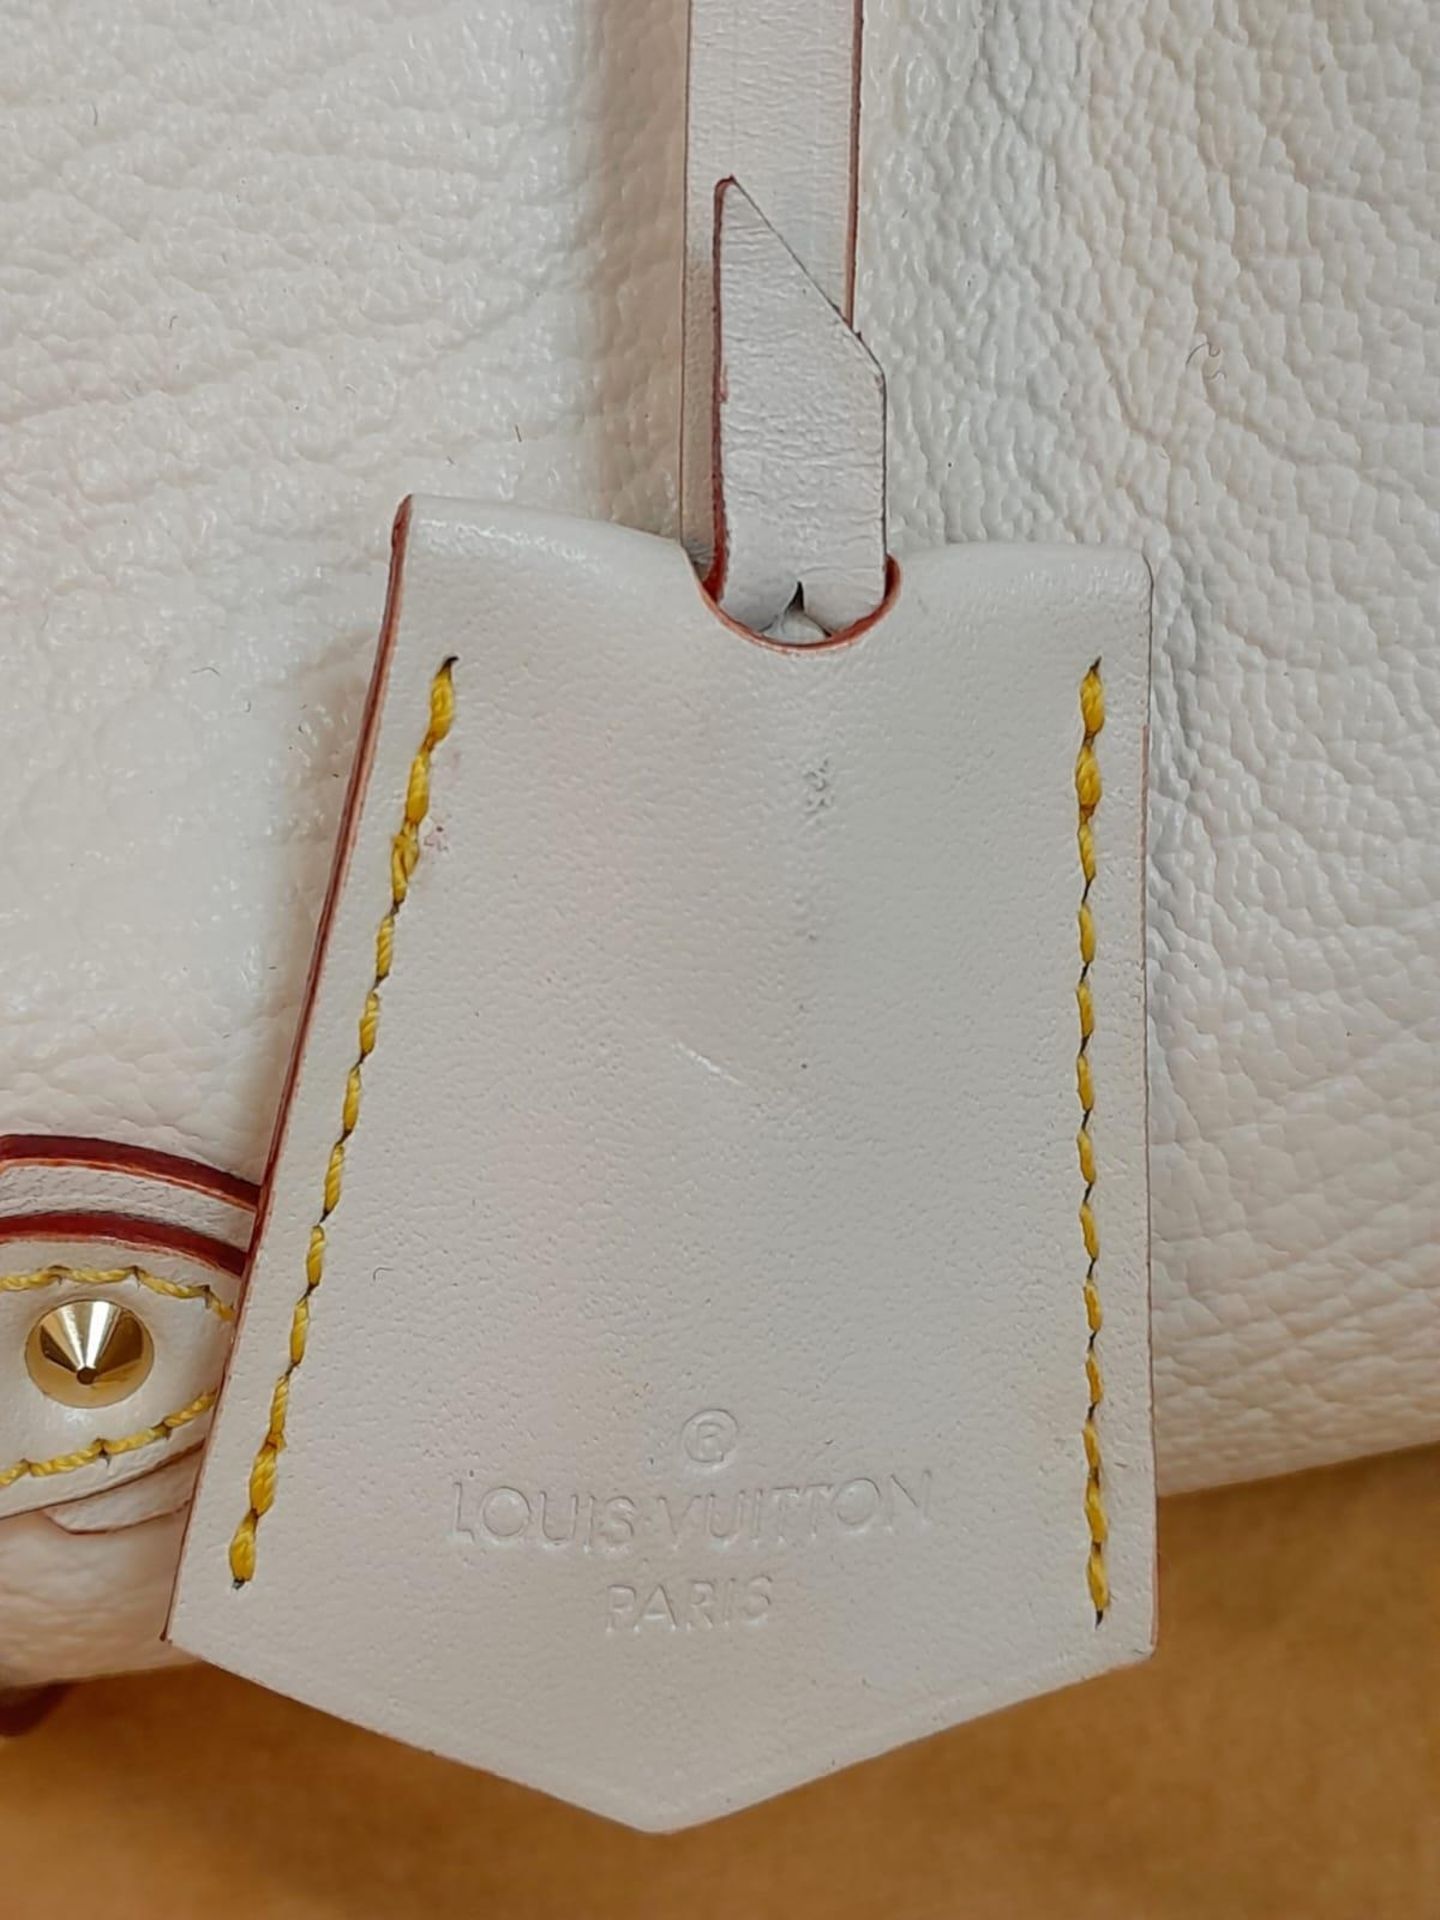 A Louis Vuitton Manhattan PM Suhali Leather Handbag. Soft white textured leather exterior with - Image 5 of 8